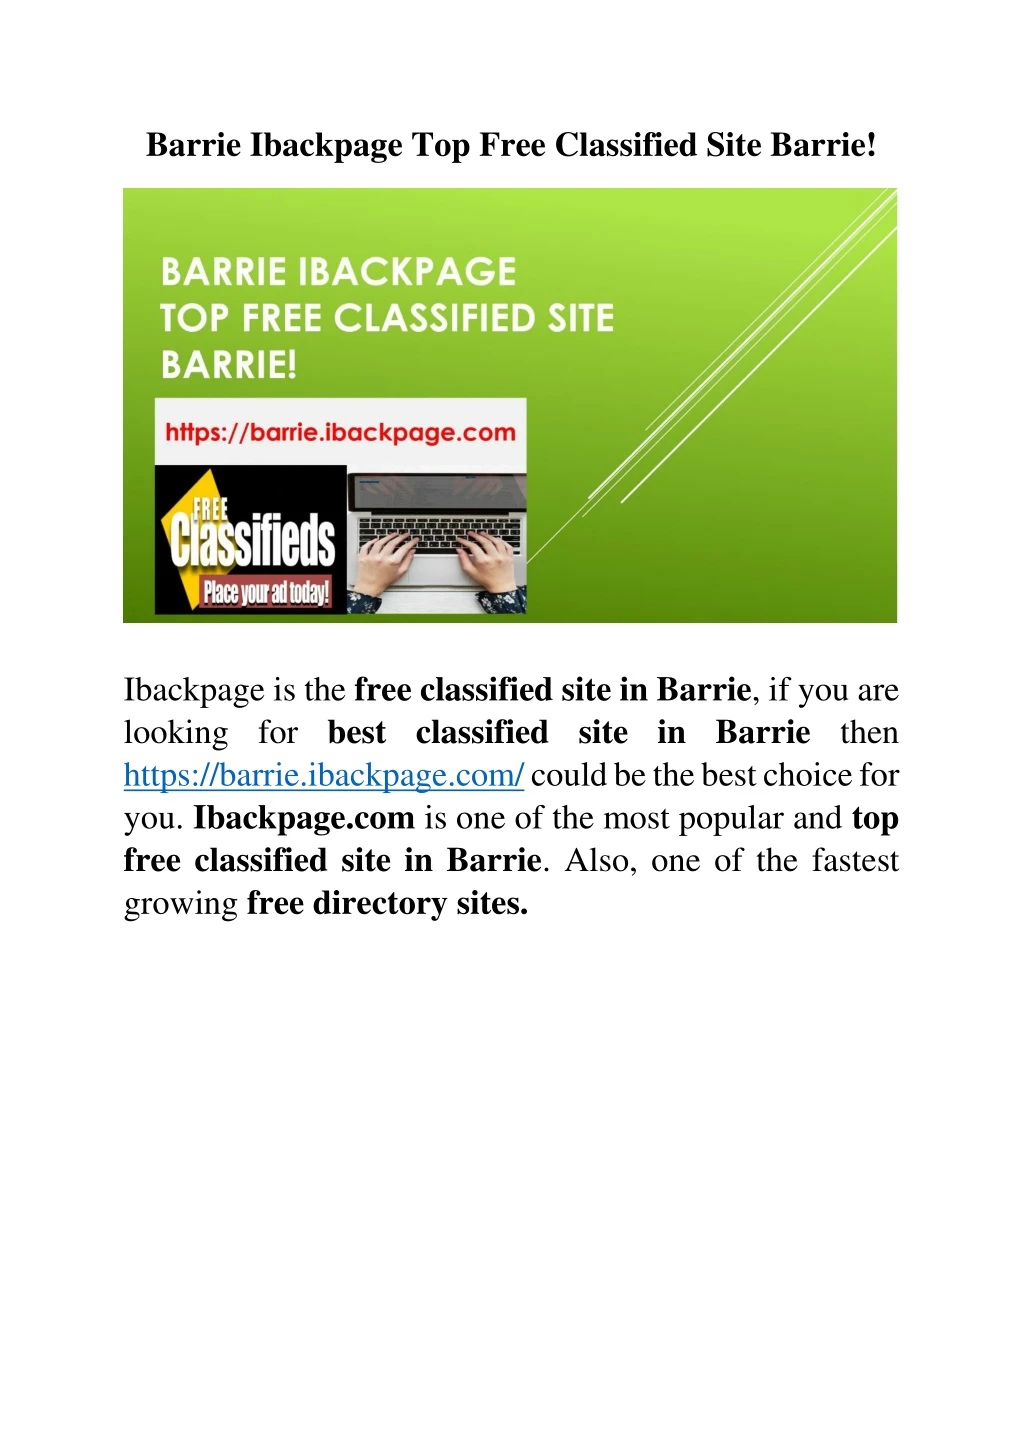 barrie ibackpage top free classified site barrie